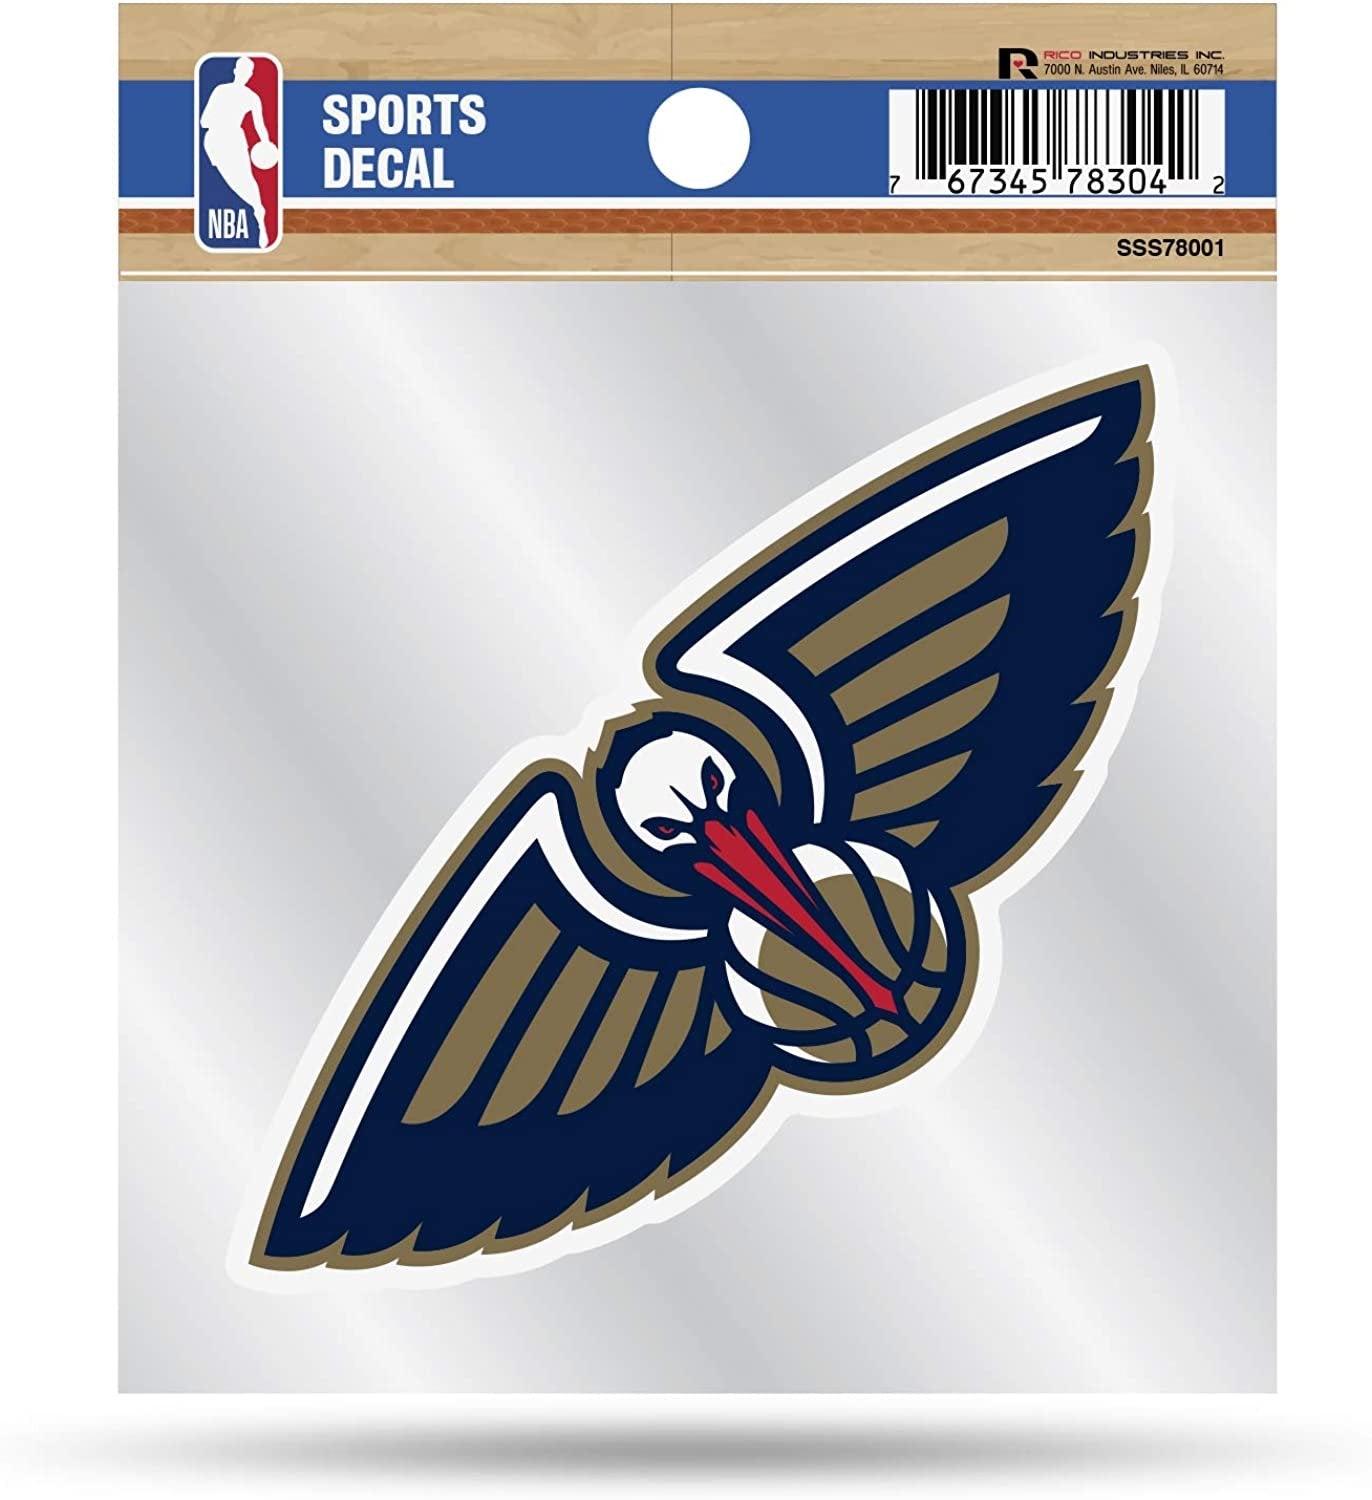 New Orleans Pelicans 4x4 Inch Die Cut Decal Sticker, Primary Logo, Clear Backing